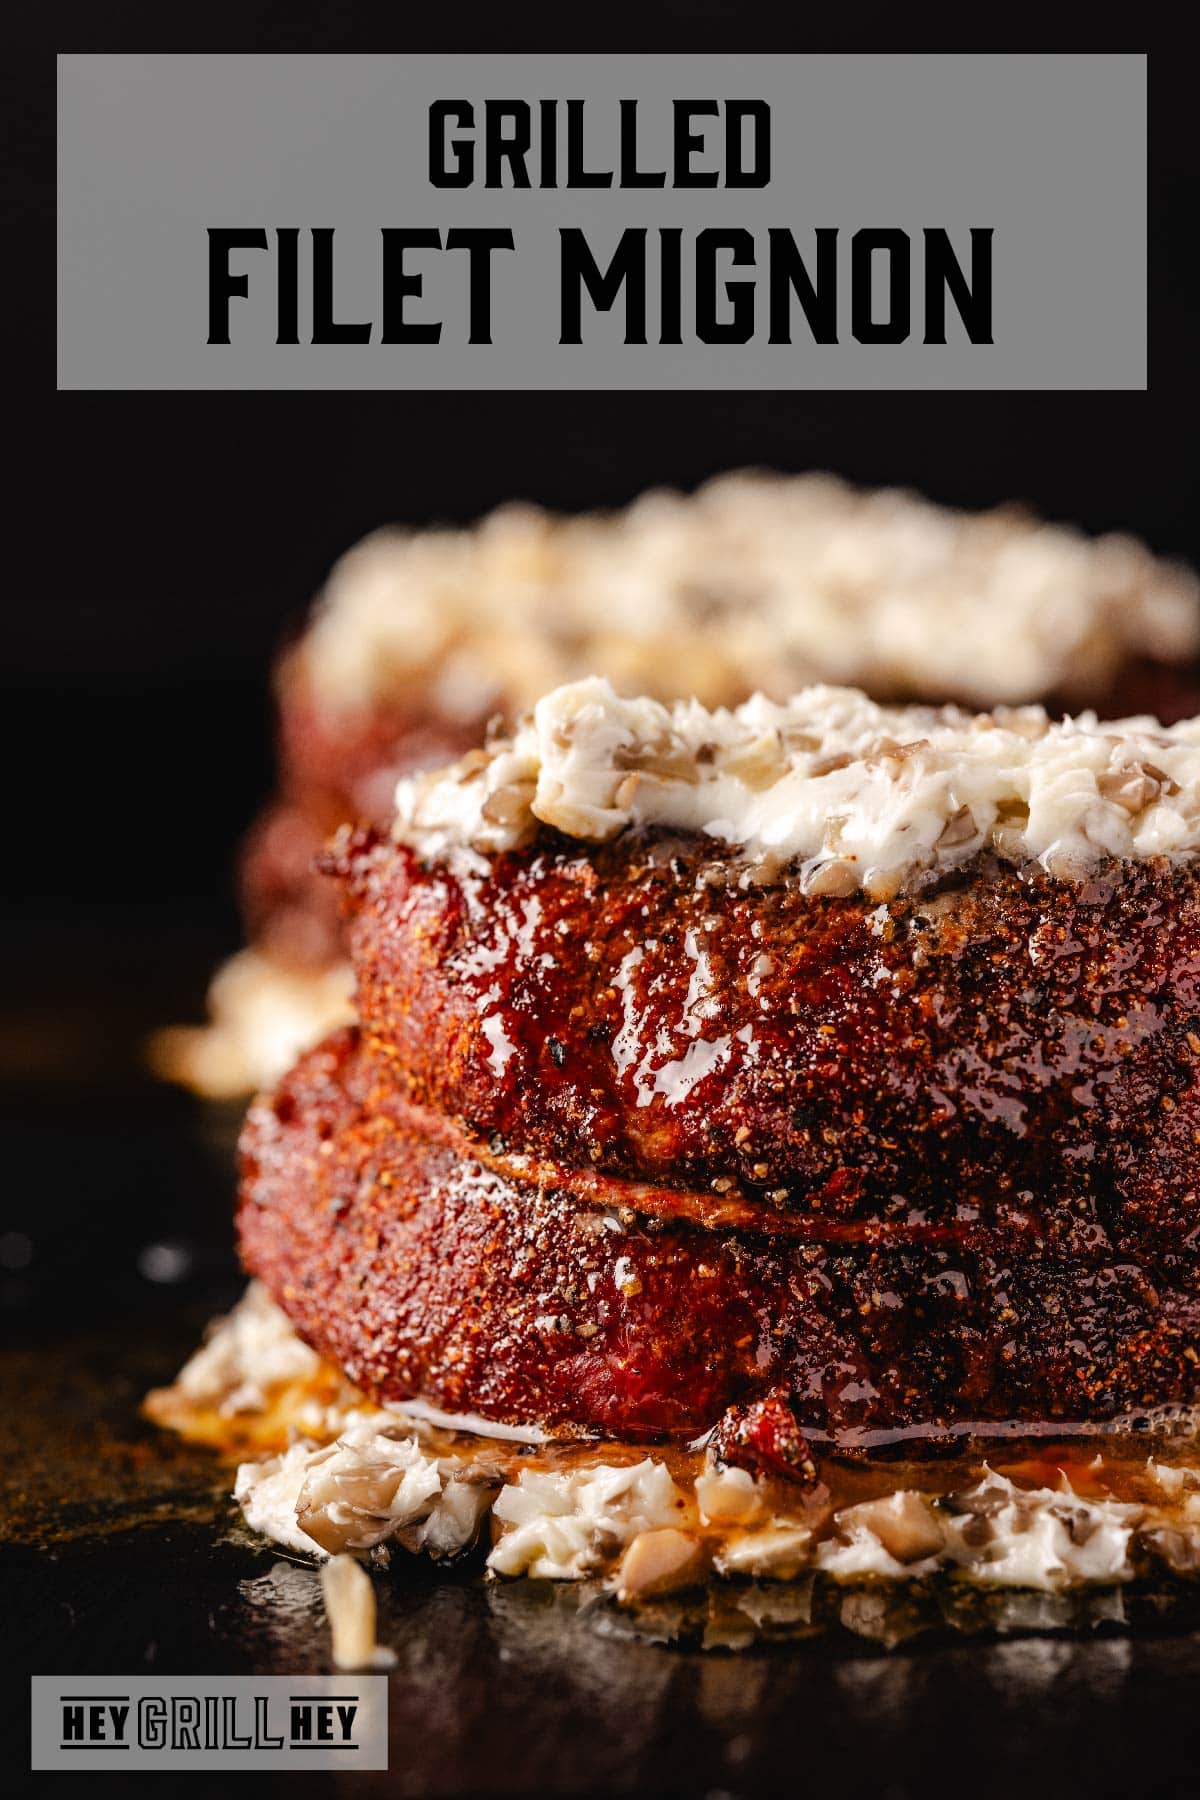 Grilled filets topped with butter. Text reads "Grilled Filet Mignon".